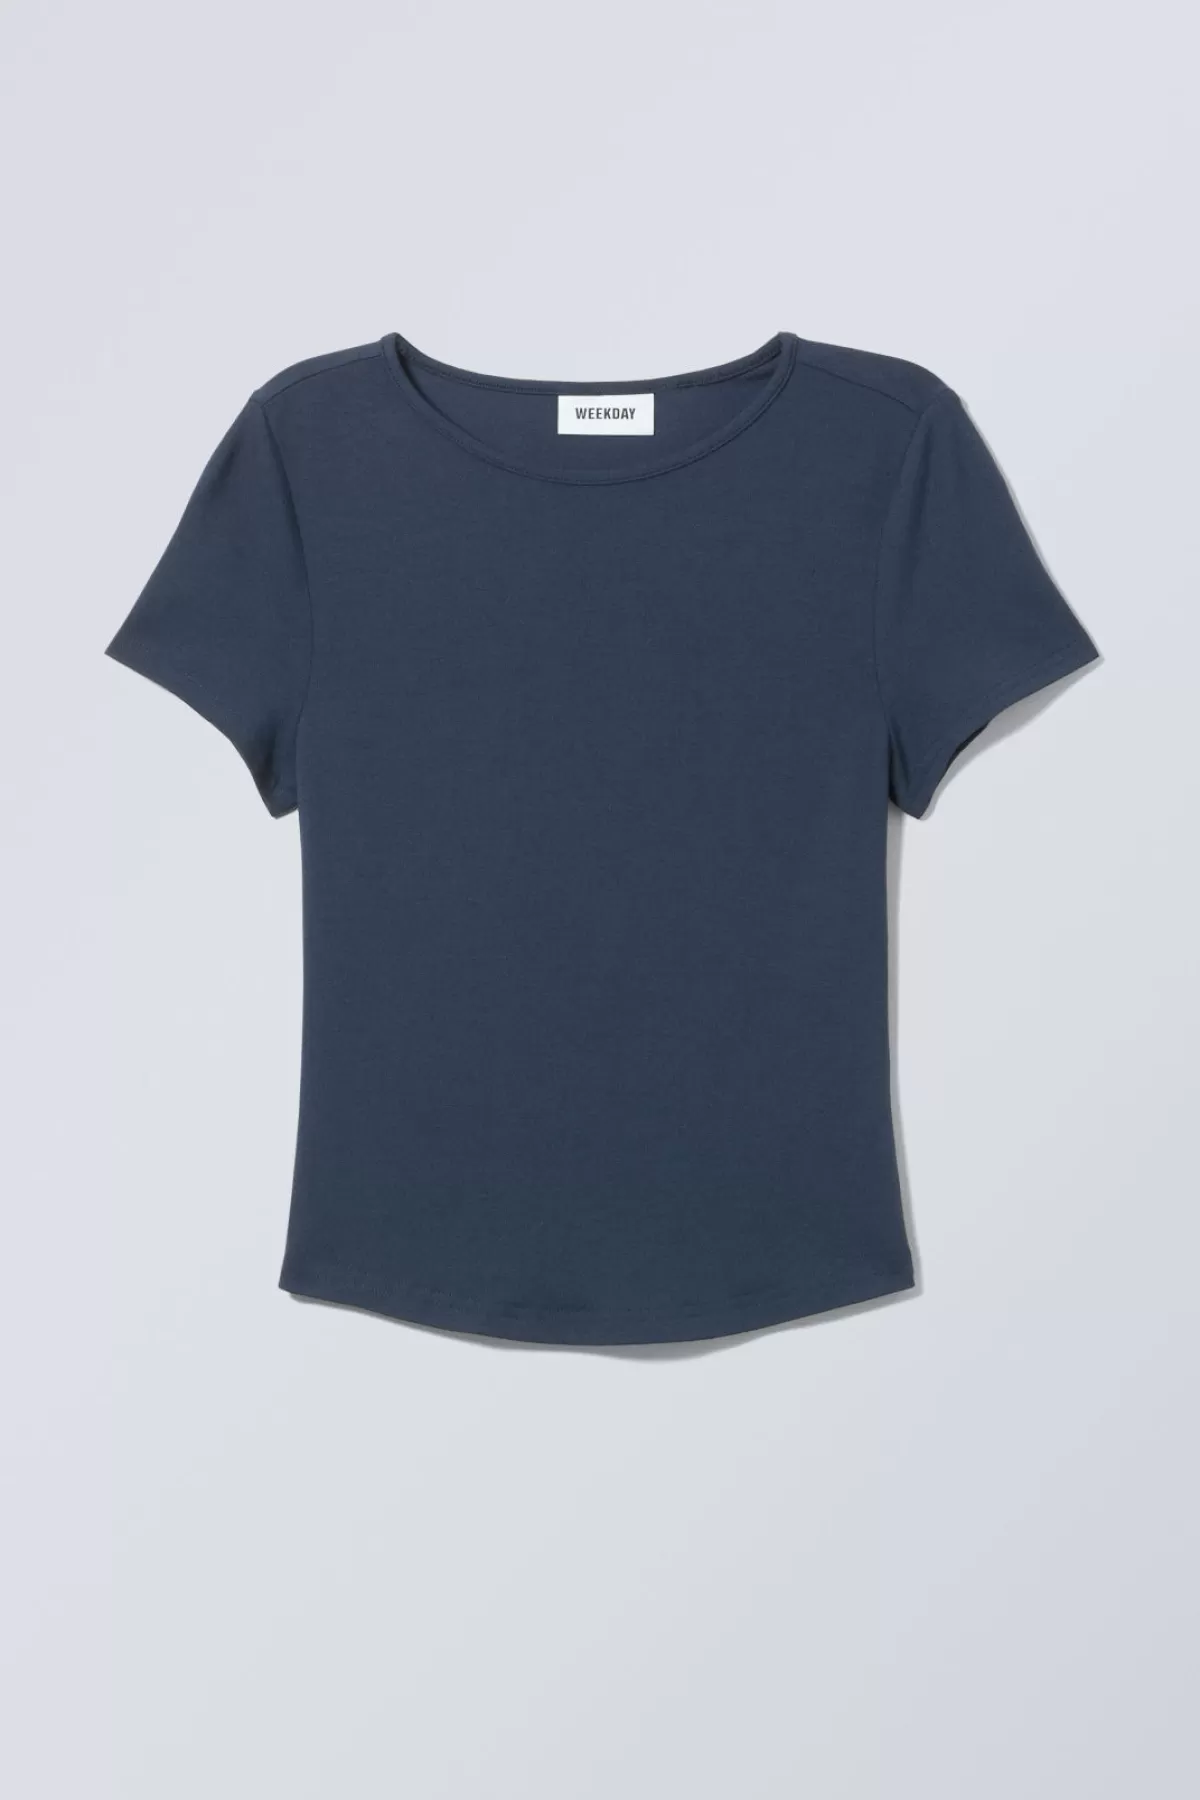 Weekday Curved Hem Fitted Modal T- shirt Best